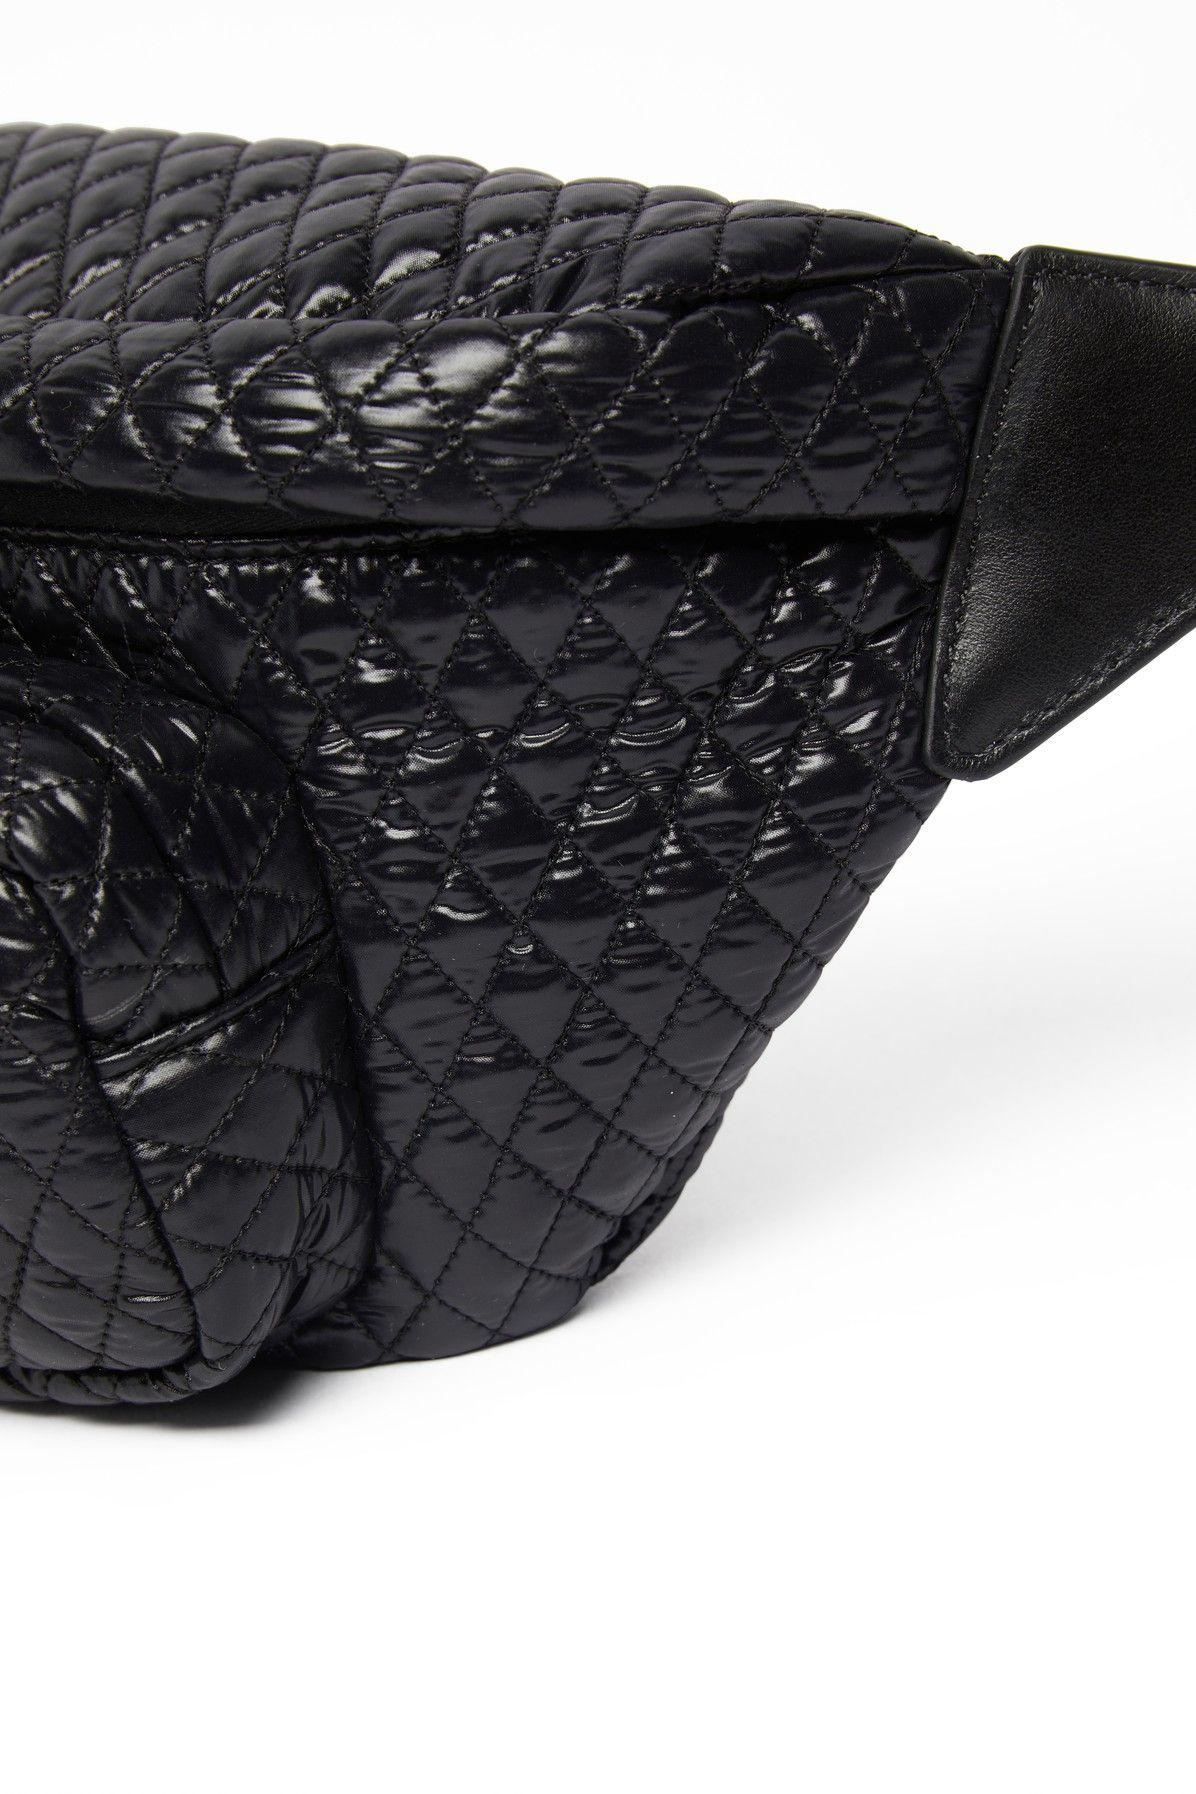 Moncler Black 'Felicie' Quilted Belt Bag Great gift idea for all occasions